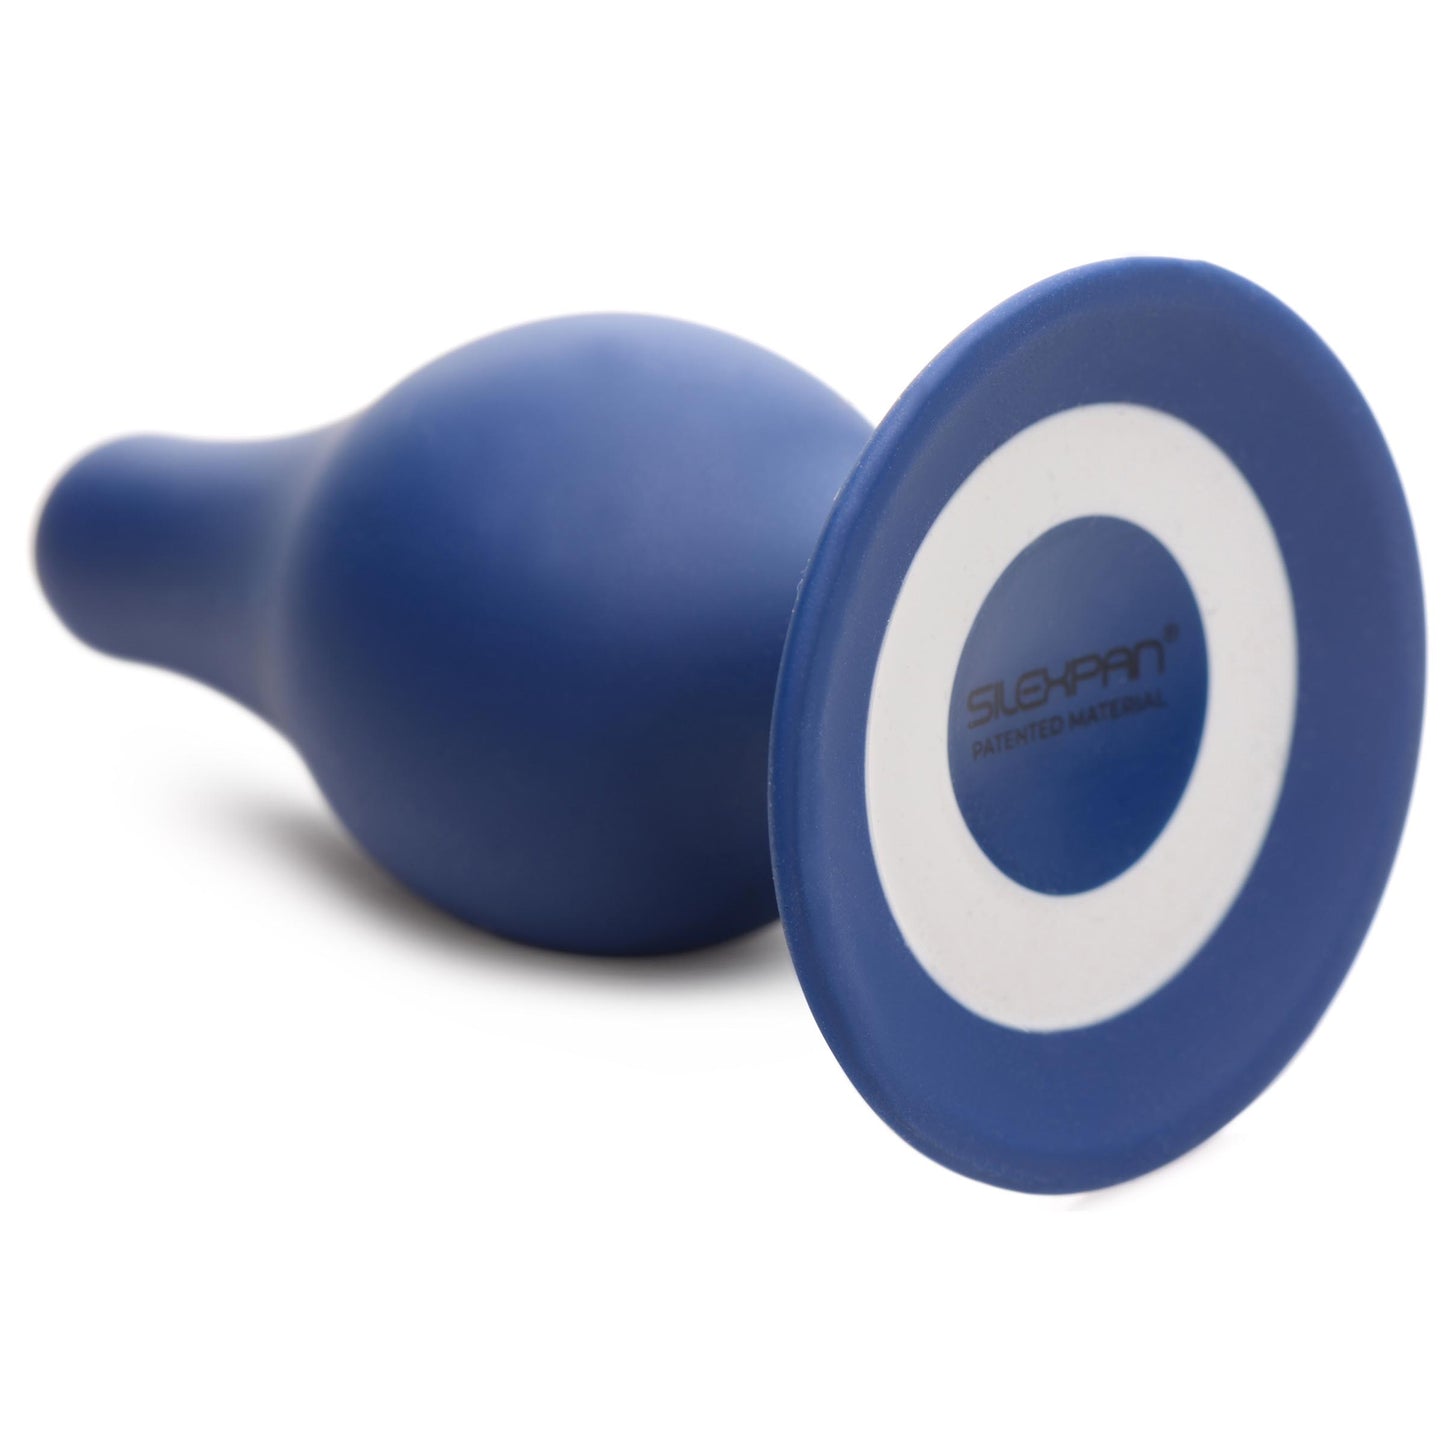 Squeezable Tapered Large Anal Plug - Blue - UABDSM